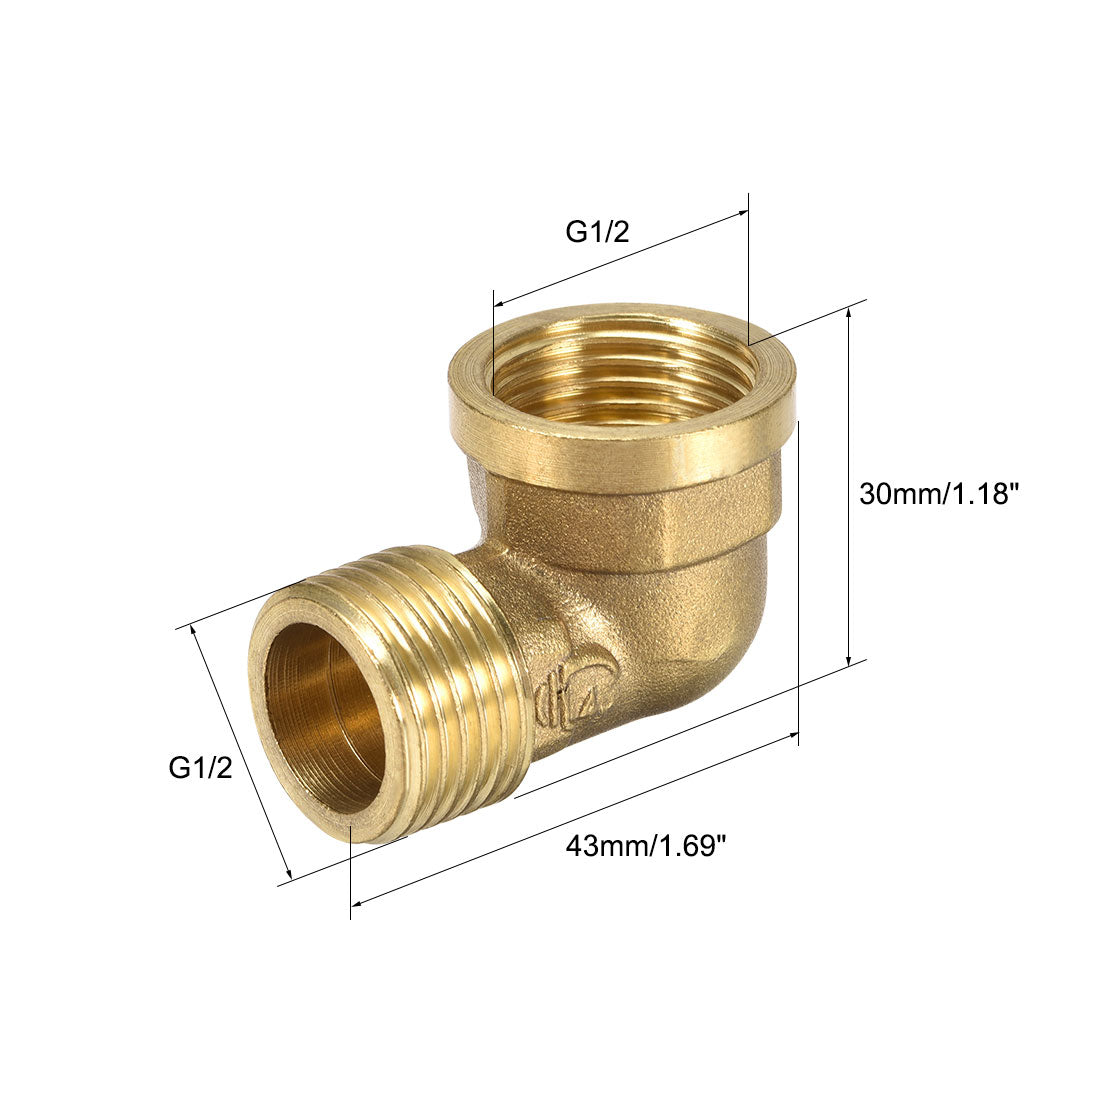 uxcell Uxcell Brass Pipe Fitting 90 Degree Street Elbow G1/2 Male x G1/2 Female